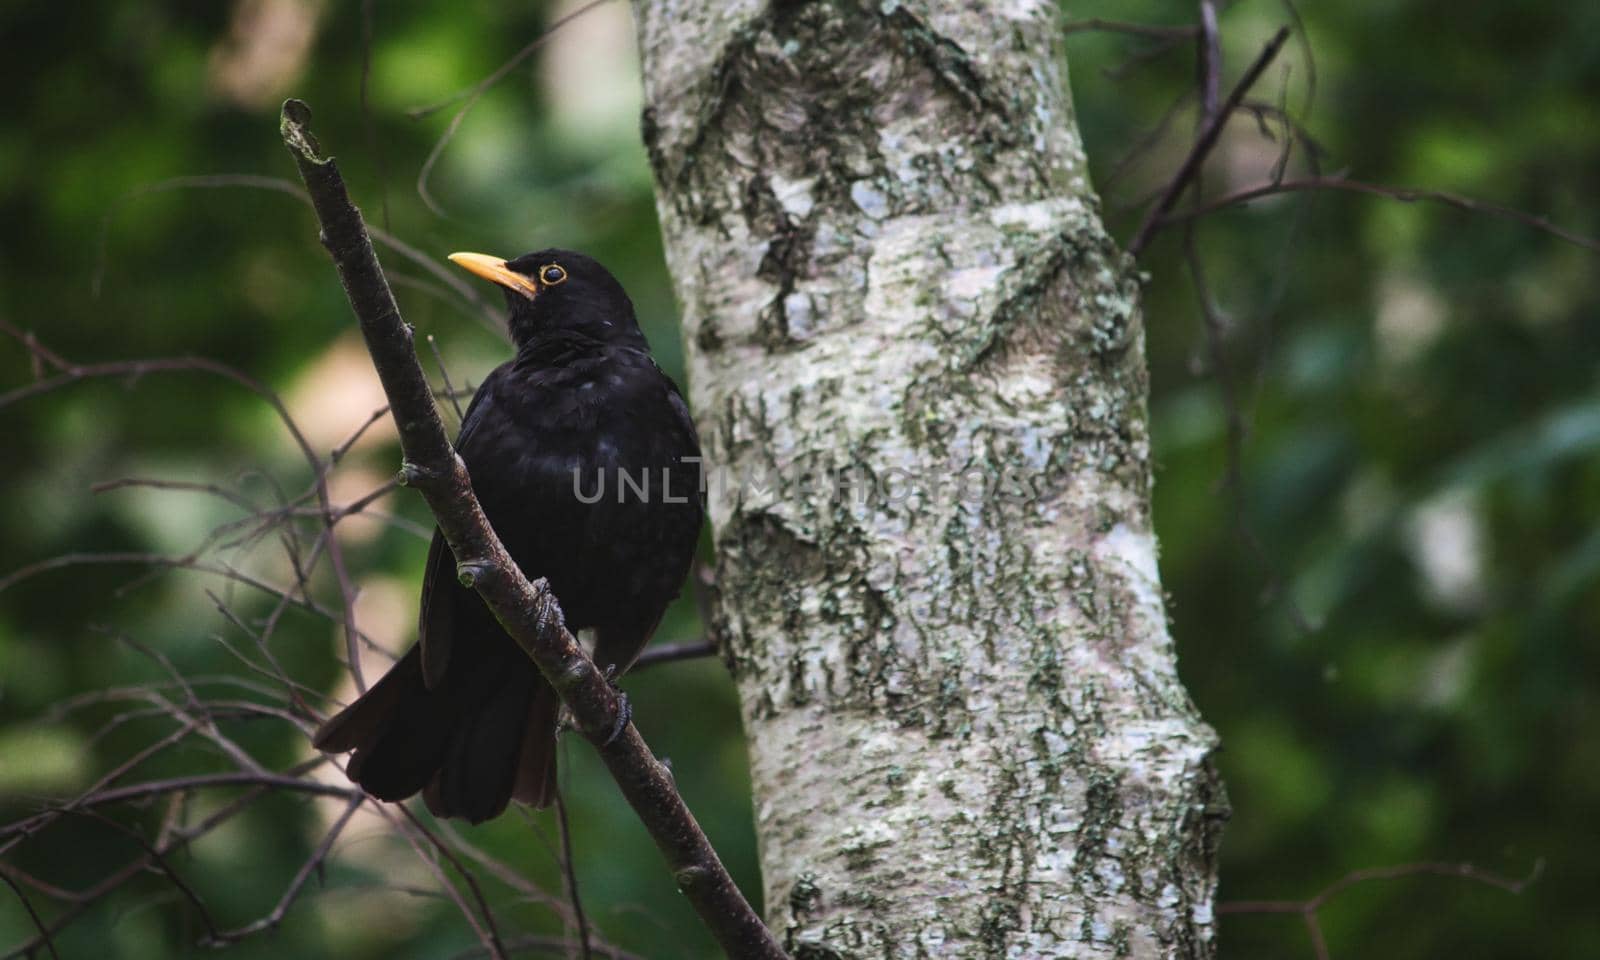 Common Blackbird perched on a branch in a tree in the forest